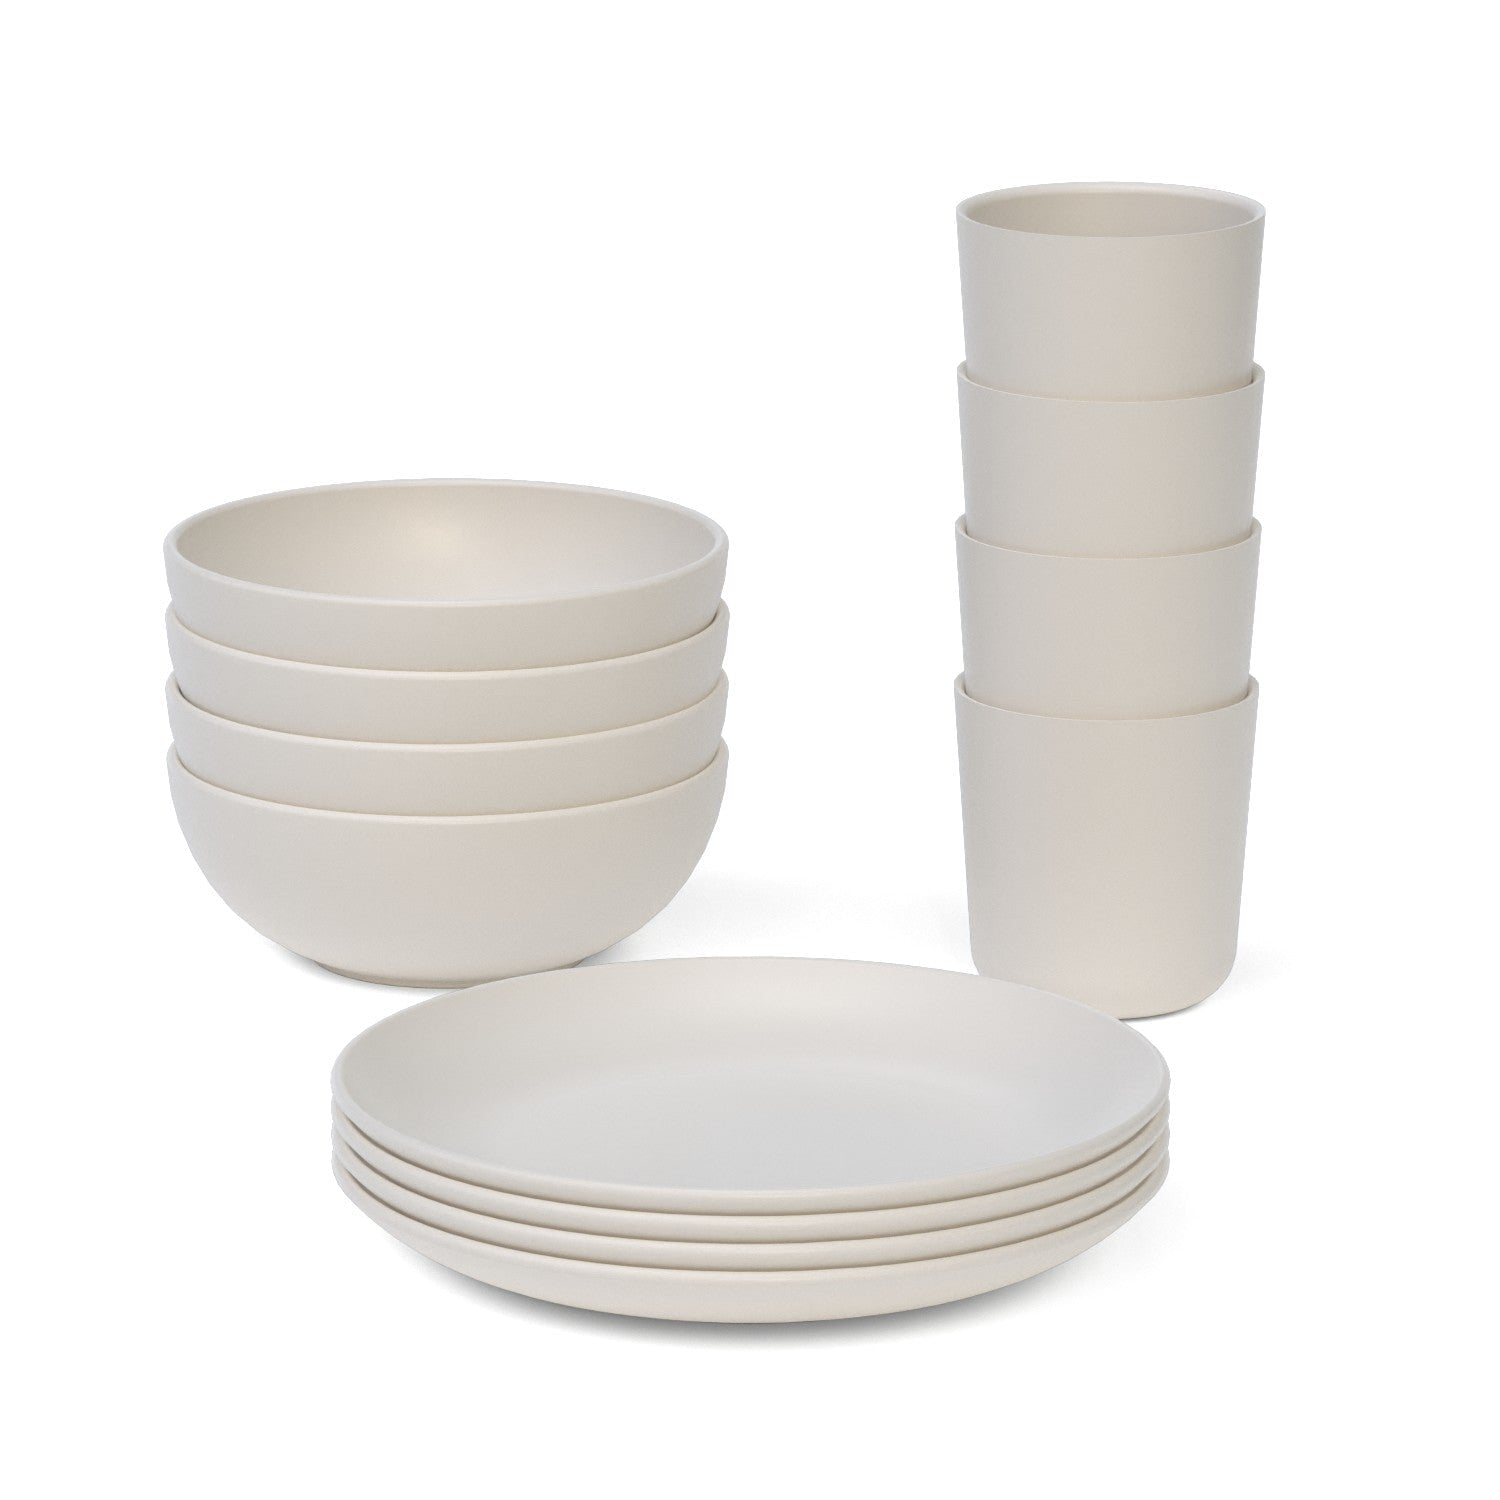 24 oz Round Cereal Bowl Set of 4 - Off White